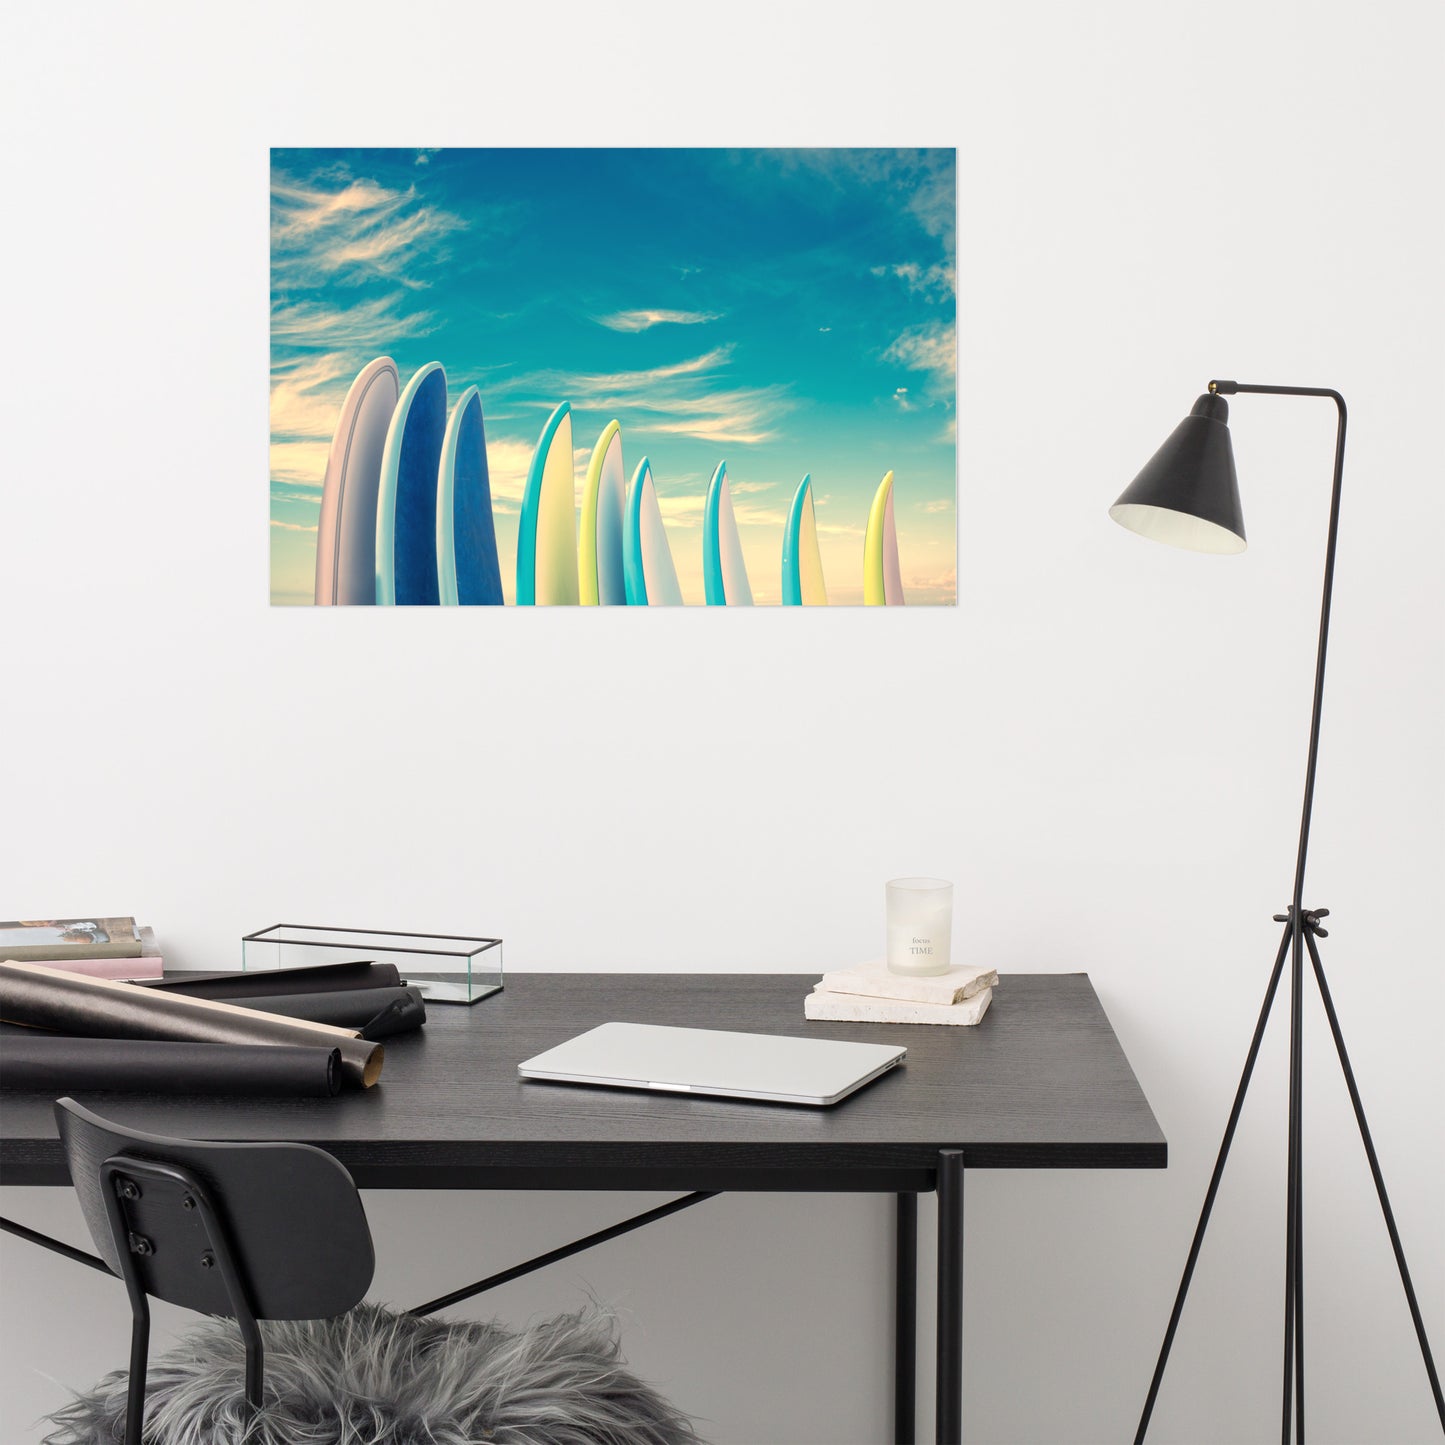 Retro Surfboards Lifestyle Photograph Loose Wall Art Print